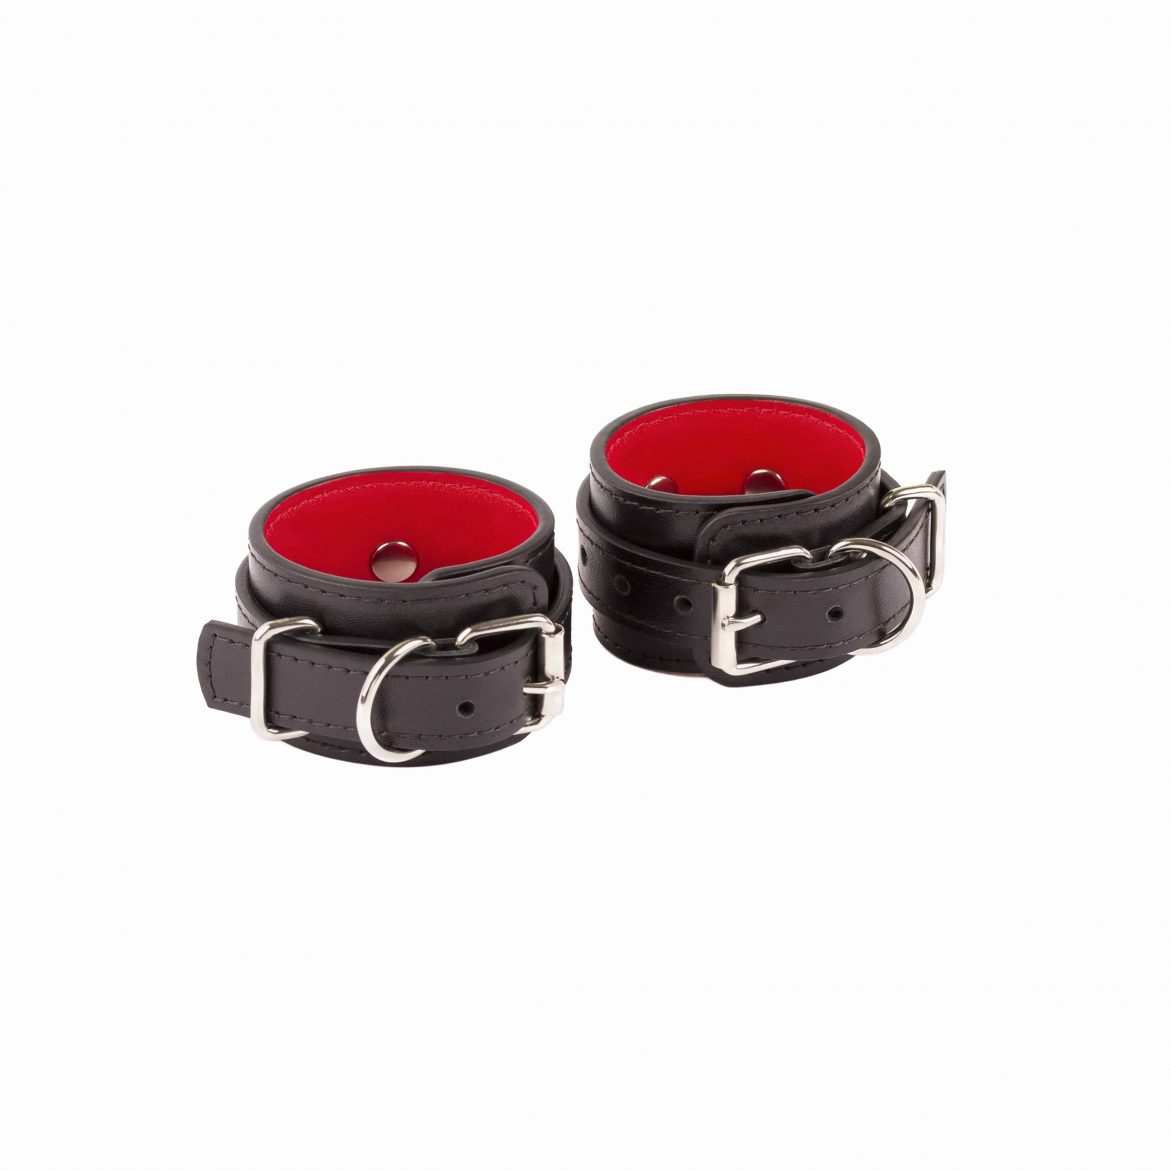 bdsm leather bondage set collar leash handcuffs pair of double fixation4 scaled